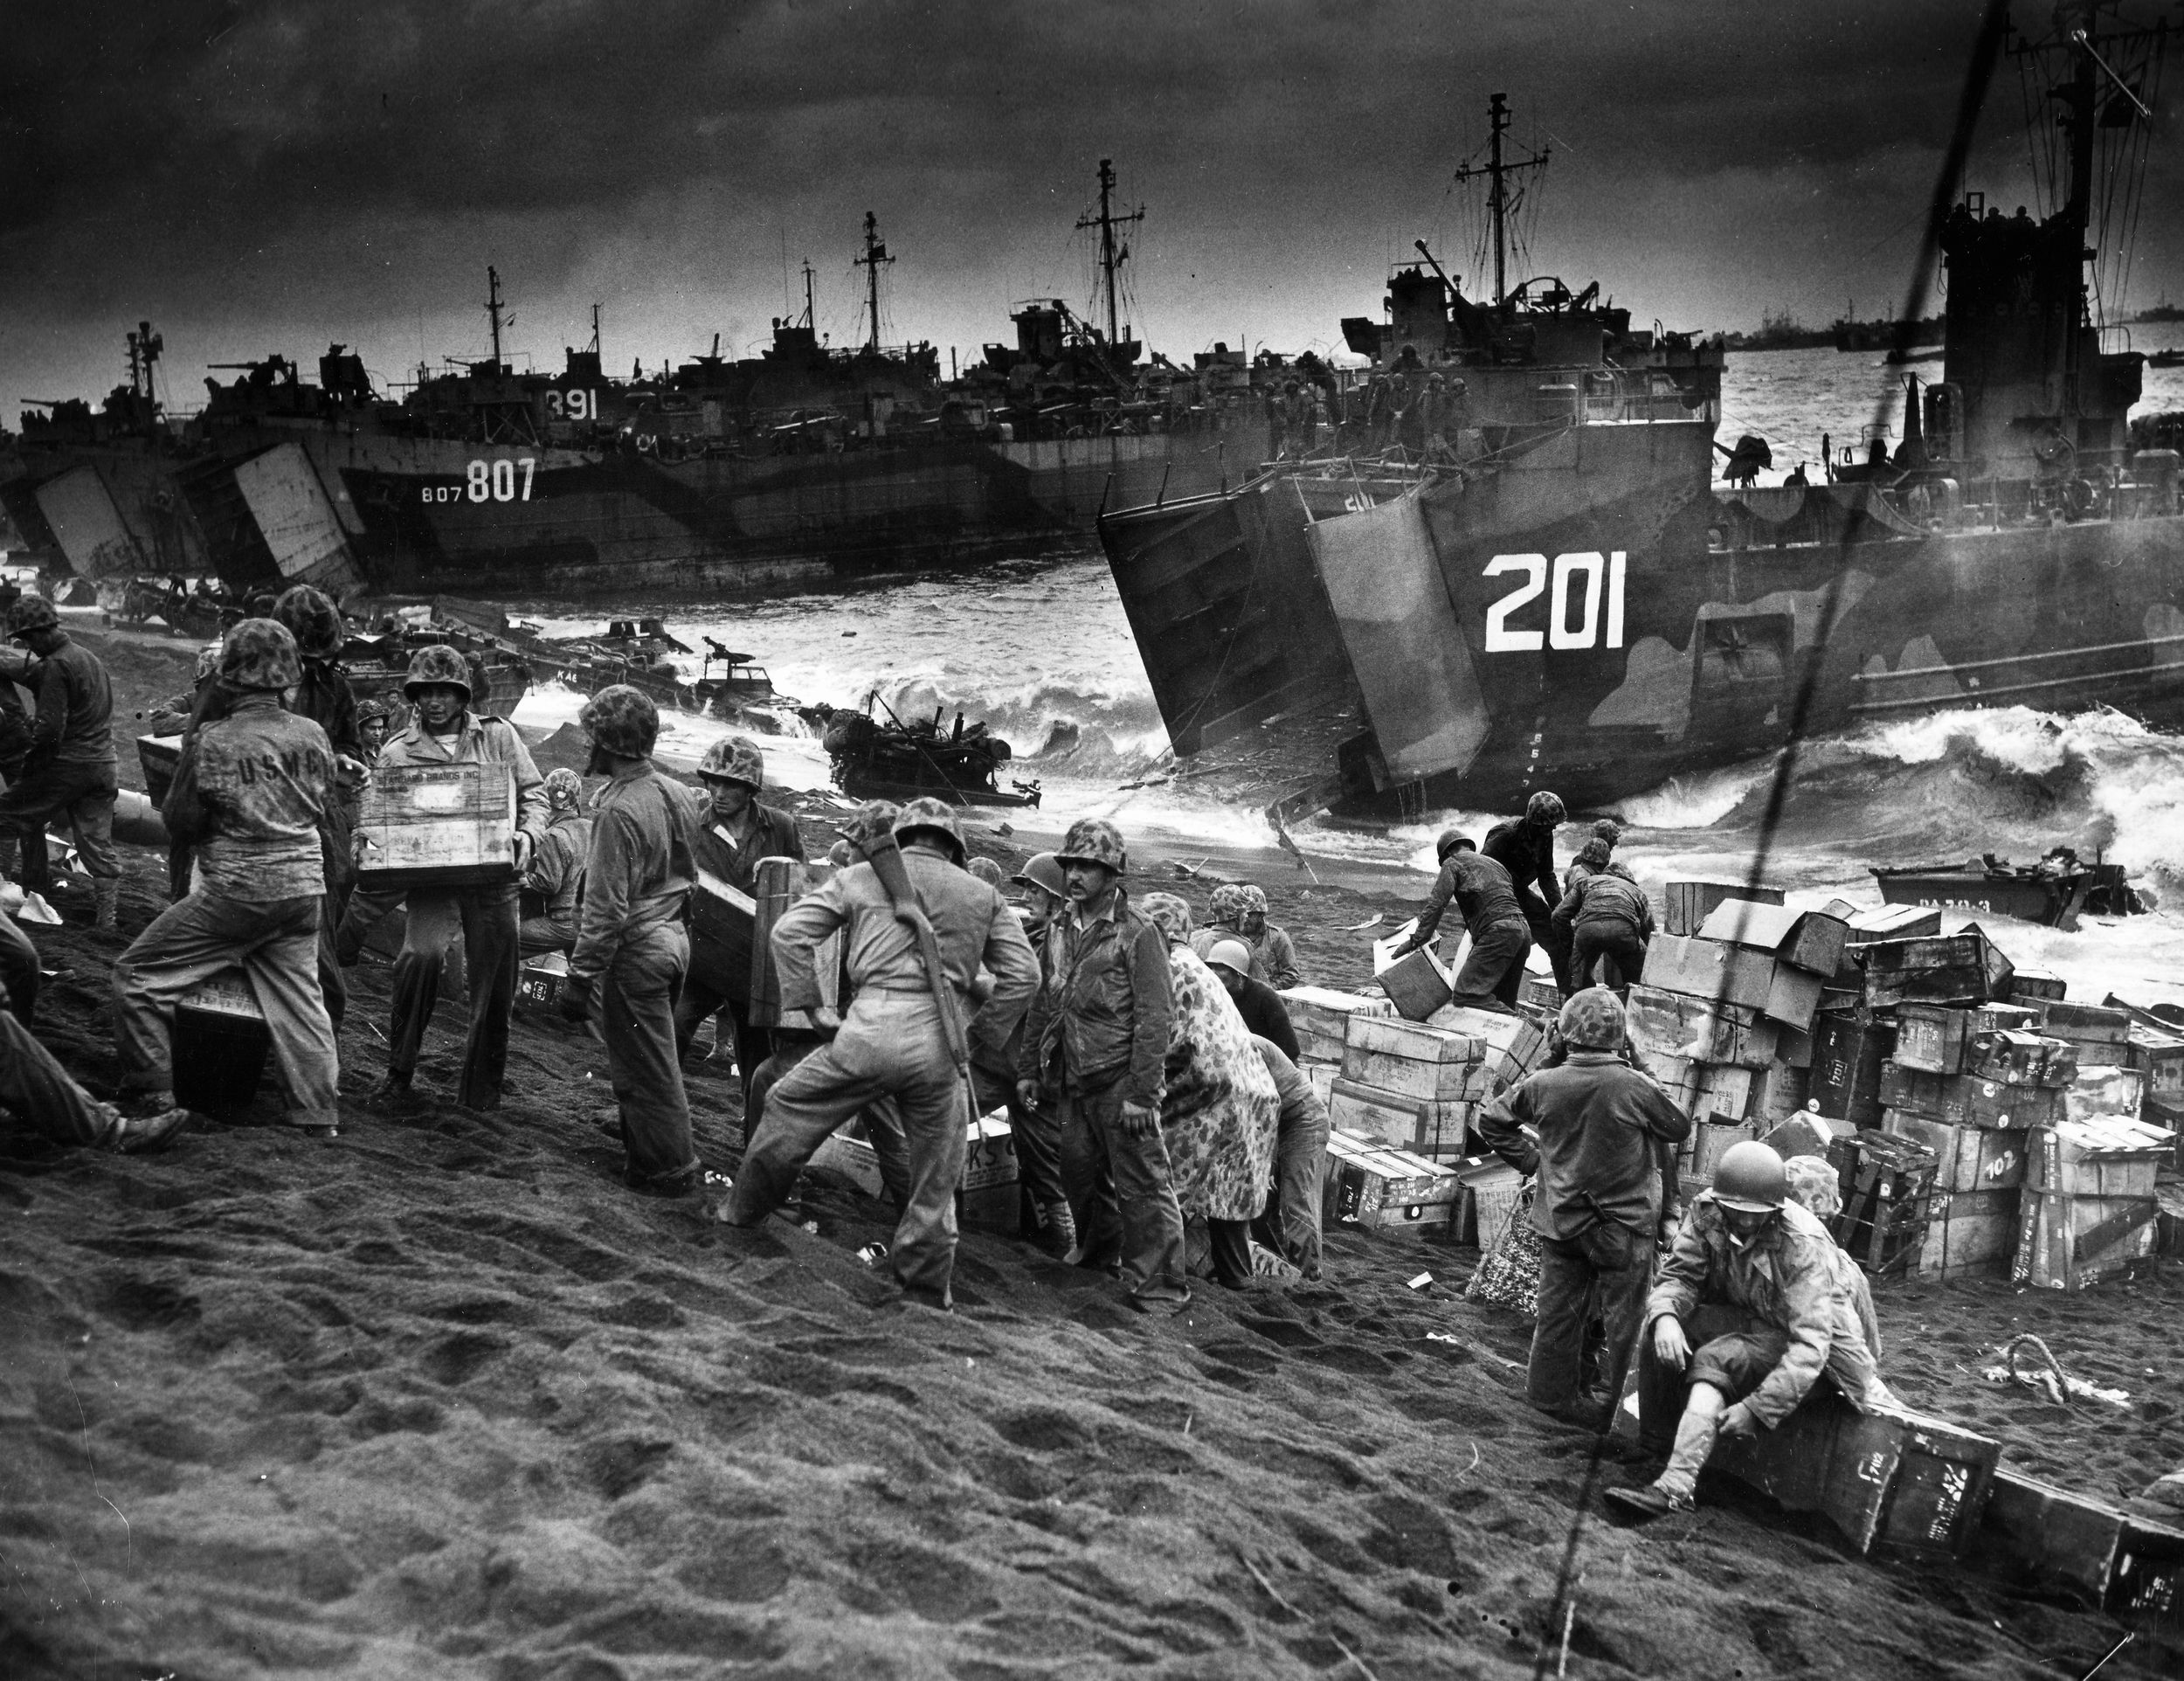 Within hours of the Marine landings on Iwo Jima, the U.S. Navy and Coast Guard crewmen of landing craft and LSTs set about the business of unloading supplies and equipment on the black beaches of the island. The loose sand proved difficult for vehicles to negotiate.